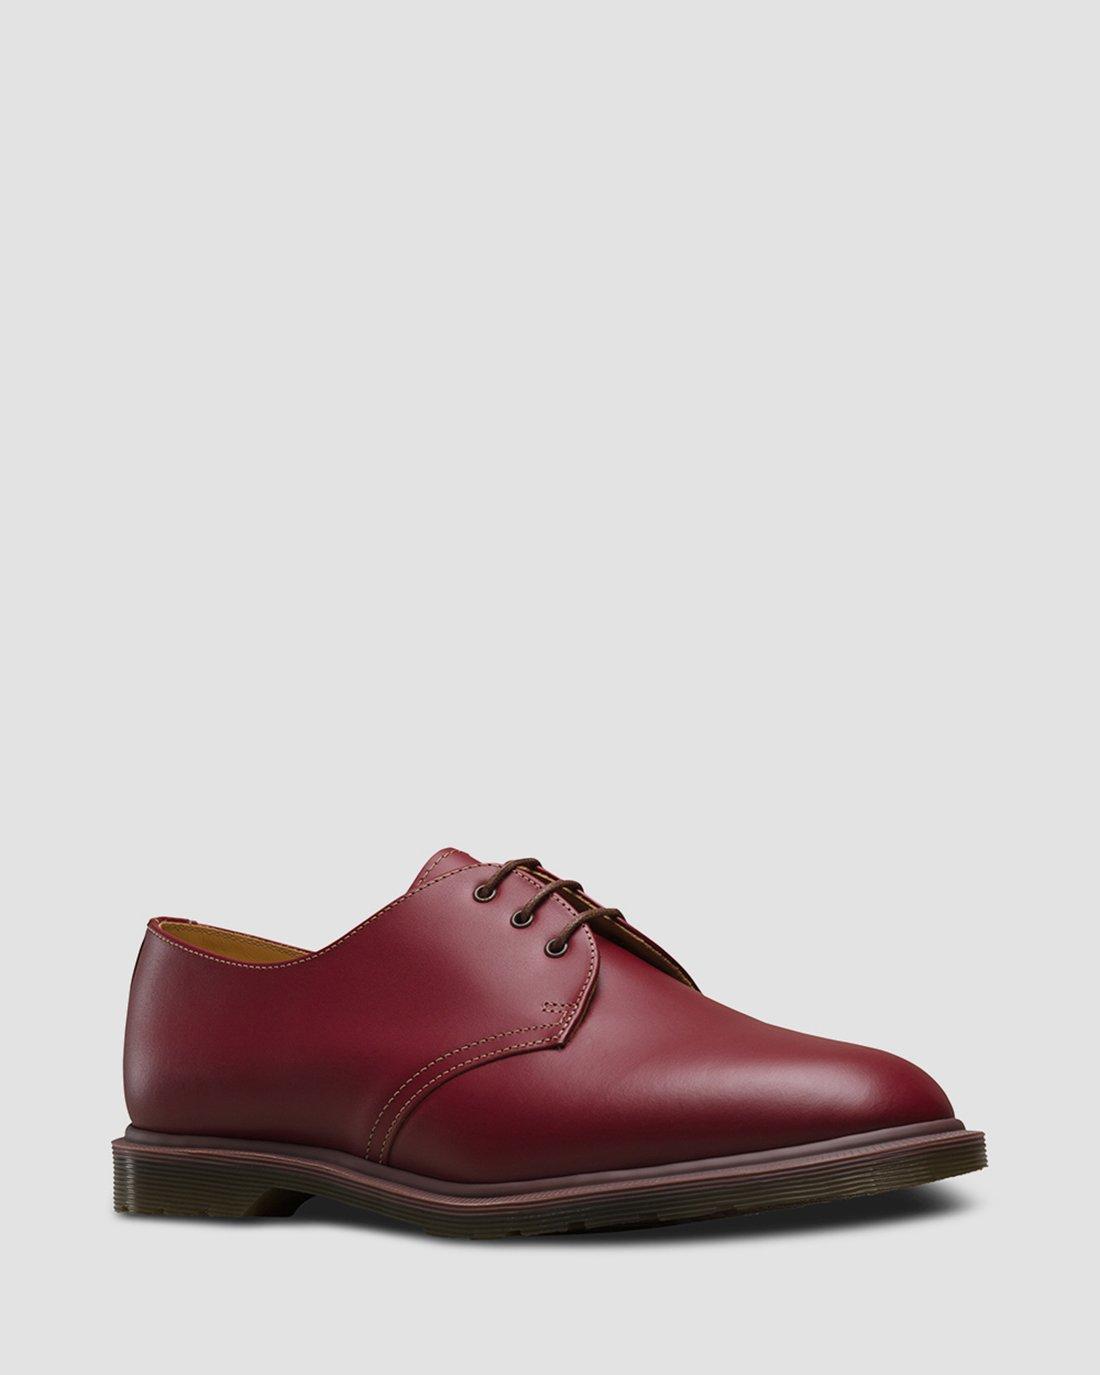 MADE IN ENGLAND STEED OXFORD SHOES | Dr 